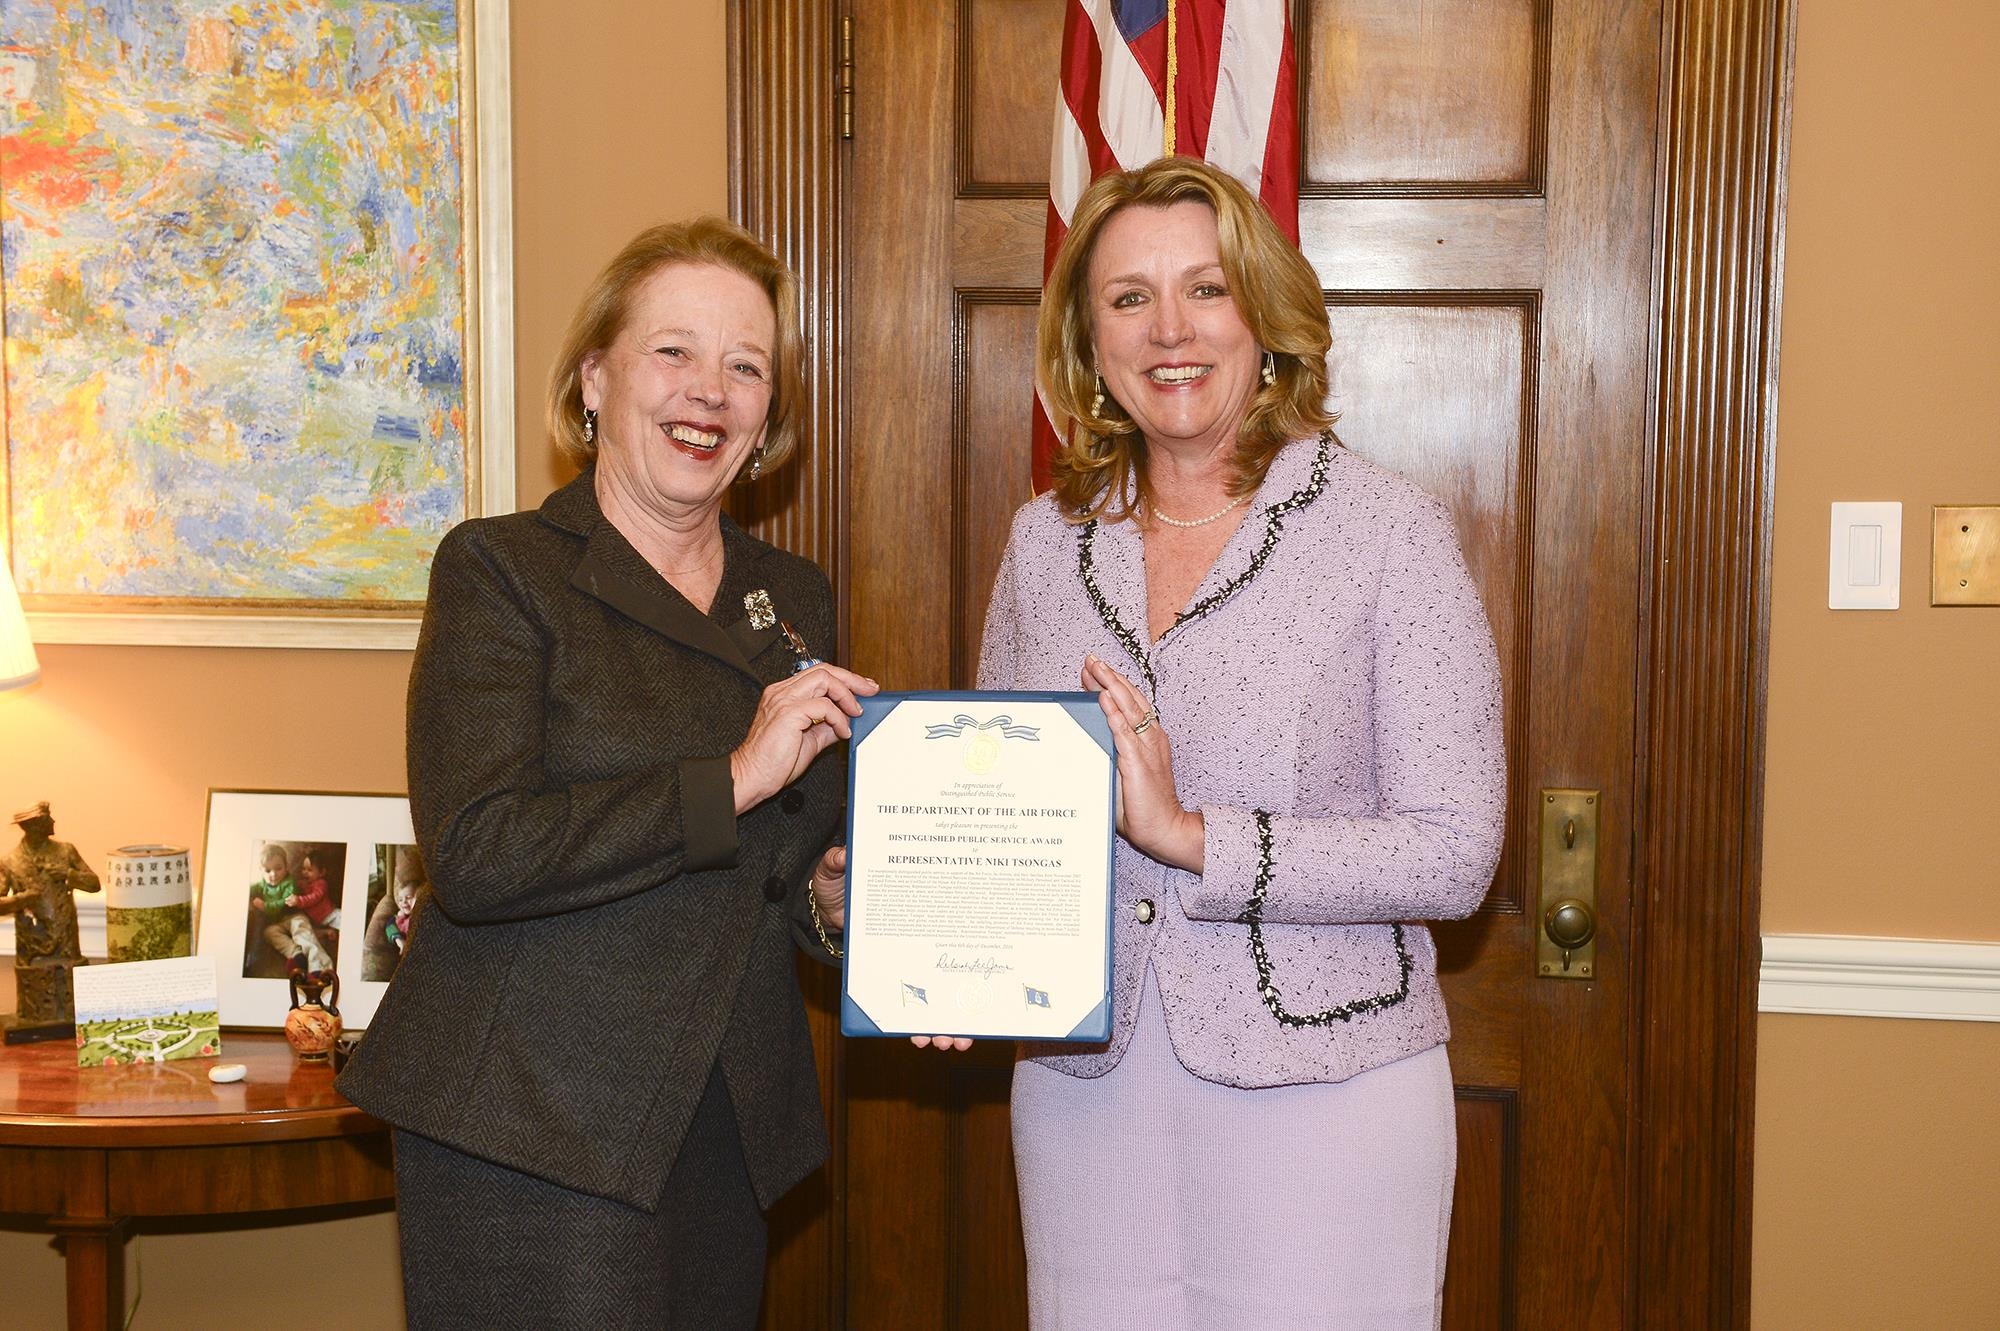 Air Force Secretary Deborah Lee James presents the Distinguished Public Service Award to U.S. Rep. Nikki Tsongas, (D-MA), in Washington, D.C. Dec 6, 2016. Tsongas, a member of the Air Force Academy Board of Visitors, helped ensure cadets were given the resources and instruction to be future Air Force leaders. Her legislation expanded technological innovation initiatives, ensuring the Air Force maintains air superiority and global reach into the future. (U.S. Air Force photo/Andy Morataya)